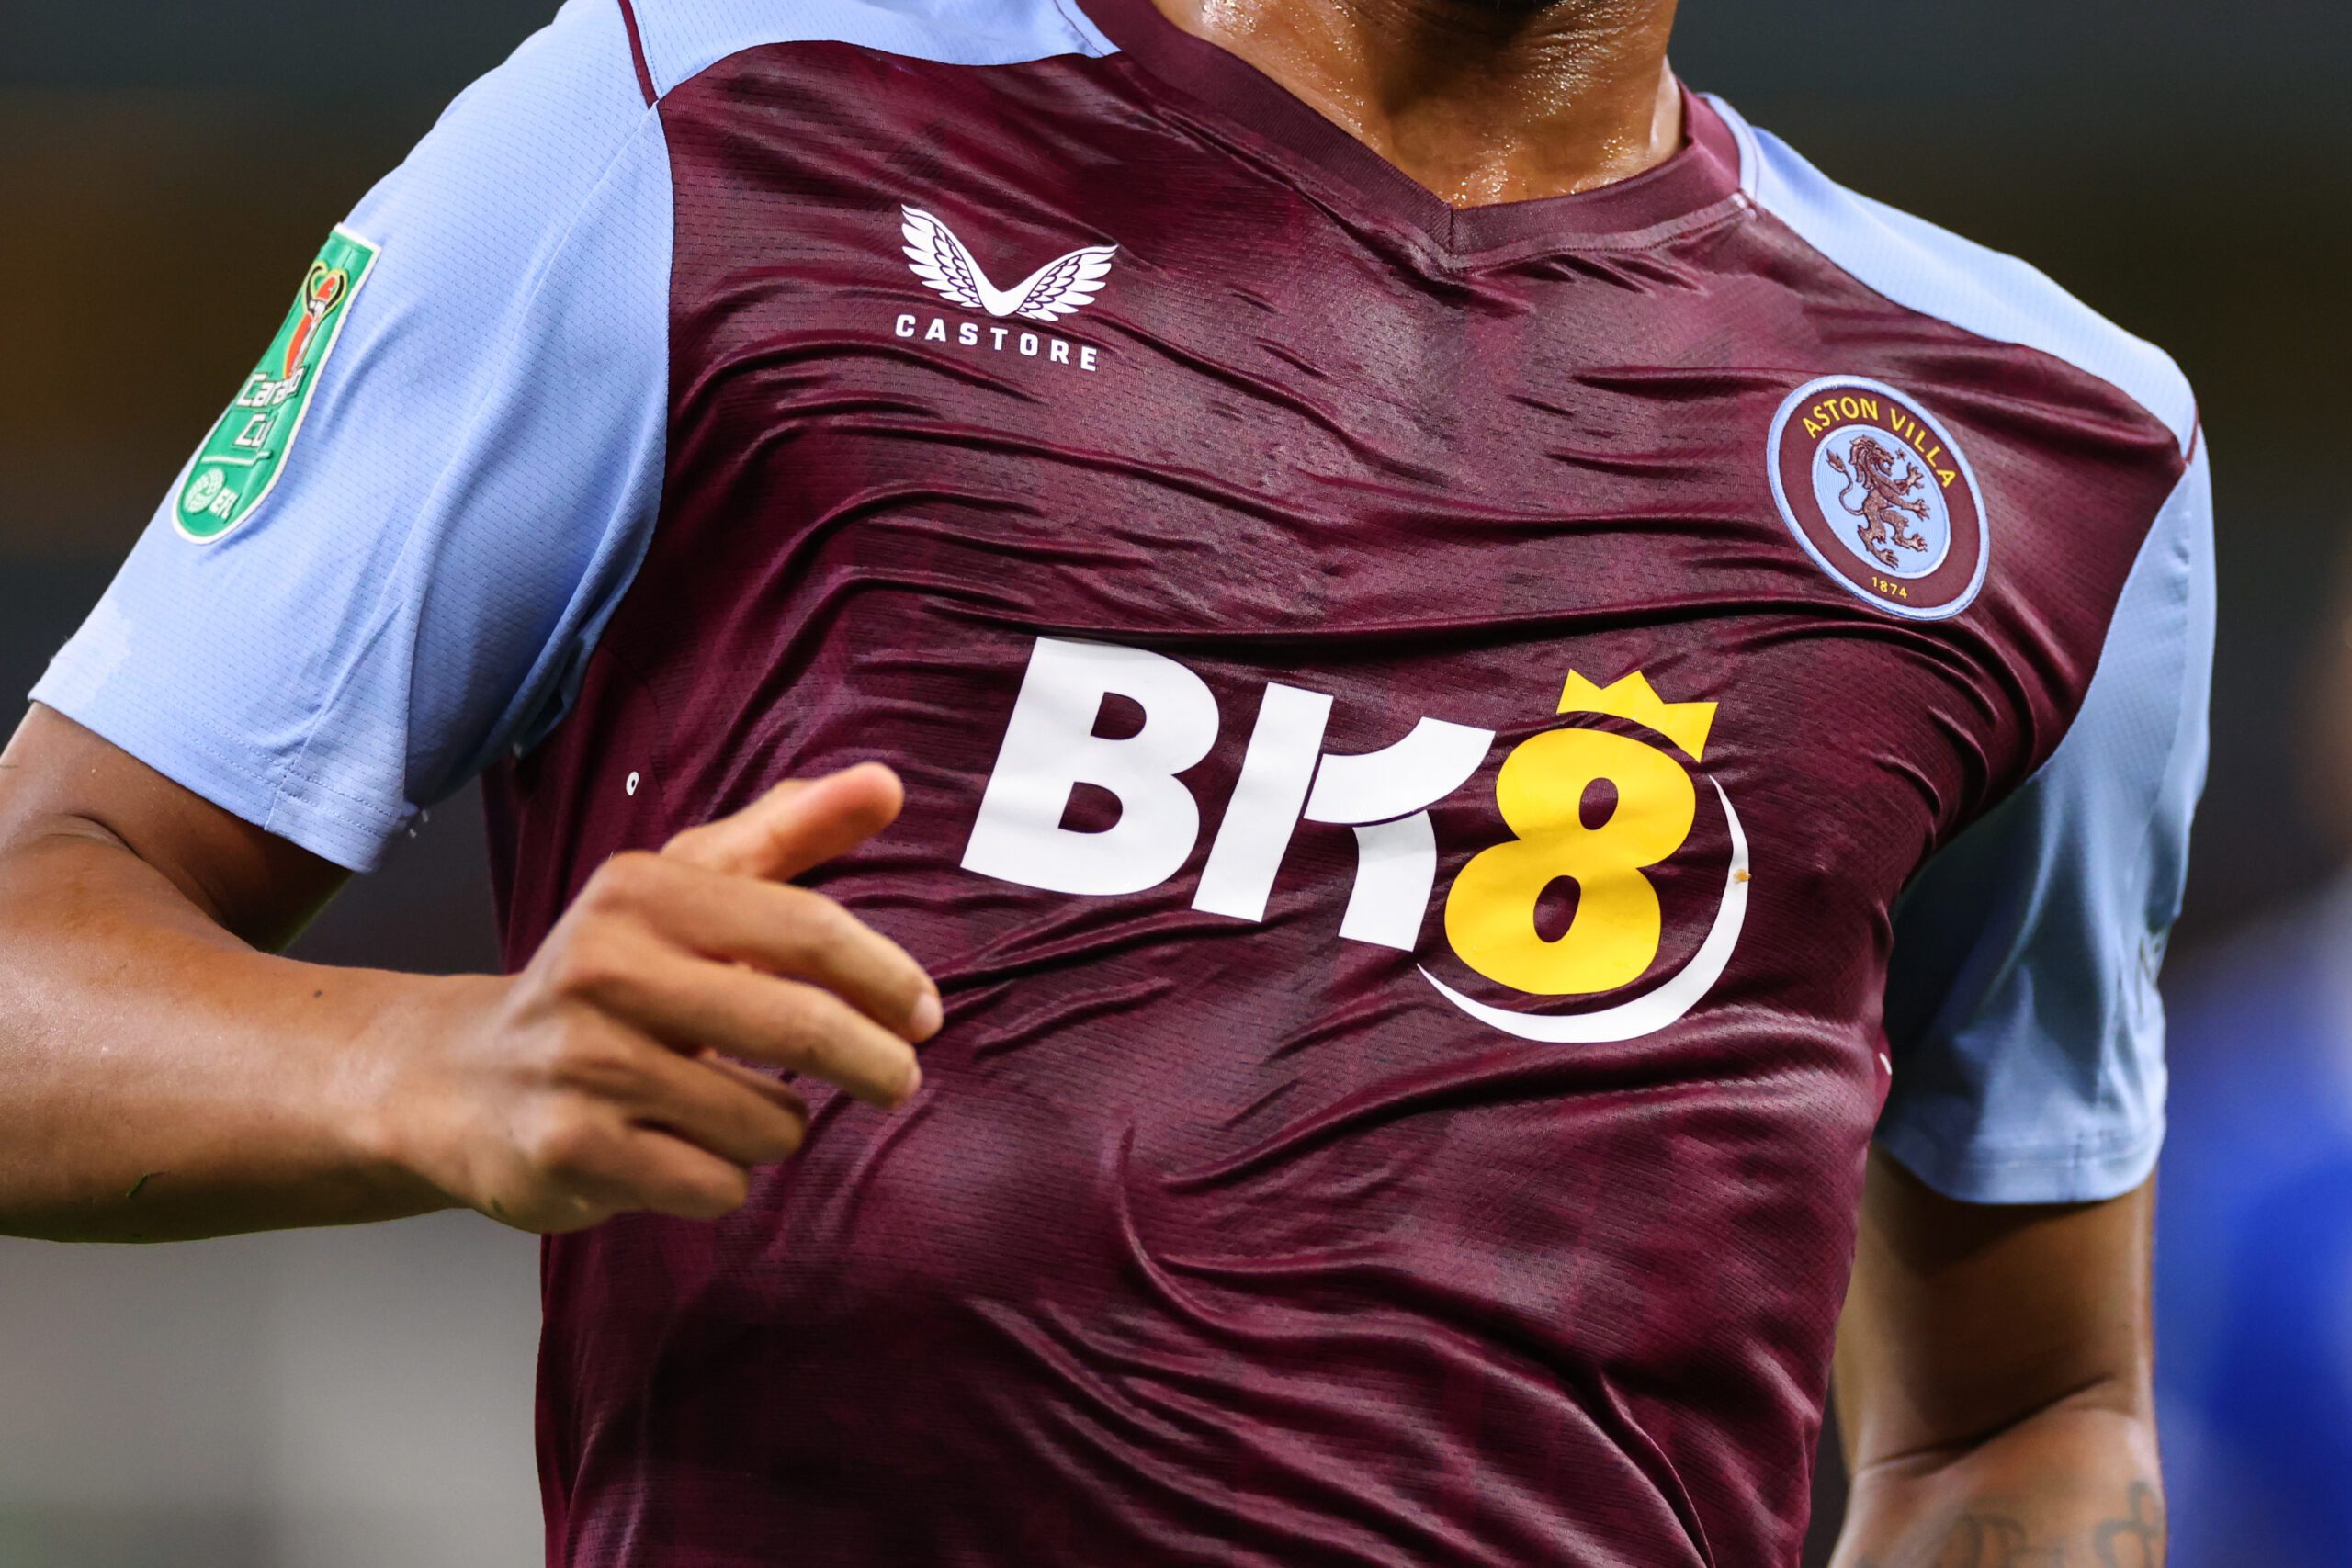 Aston Villa to wear Castore kits this weekend despite “concern” from players